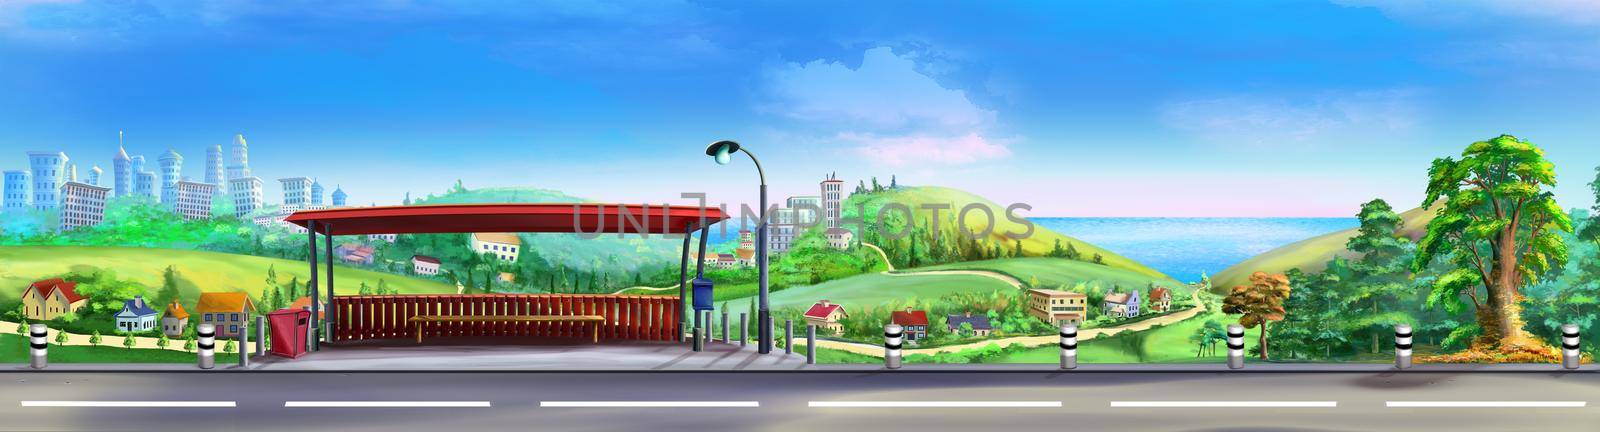 Bus stop on a Scenic road illustration by Multipedia